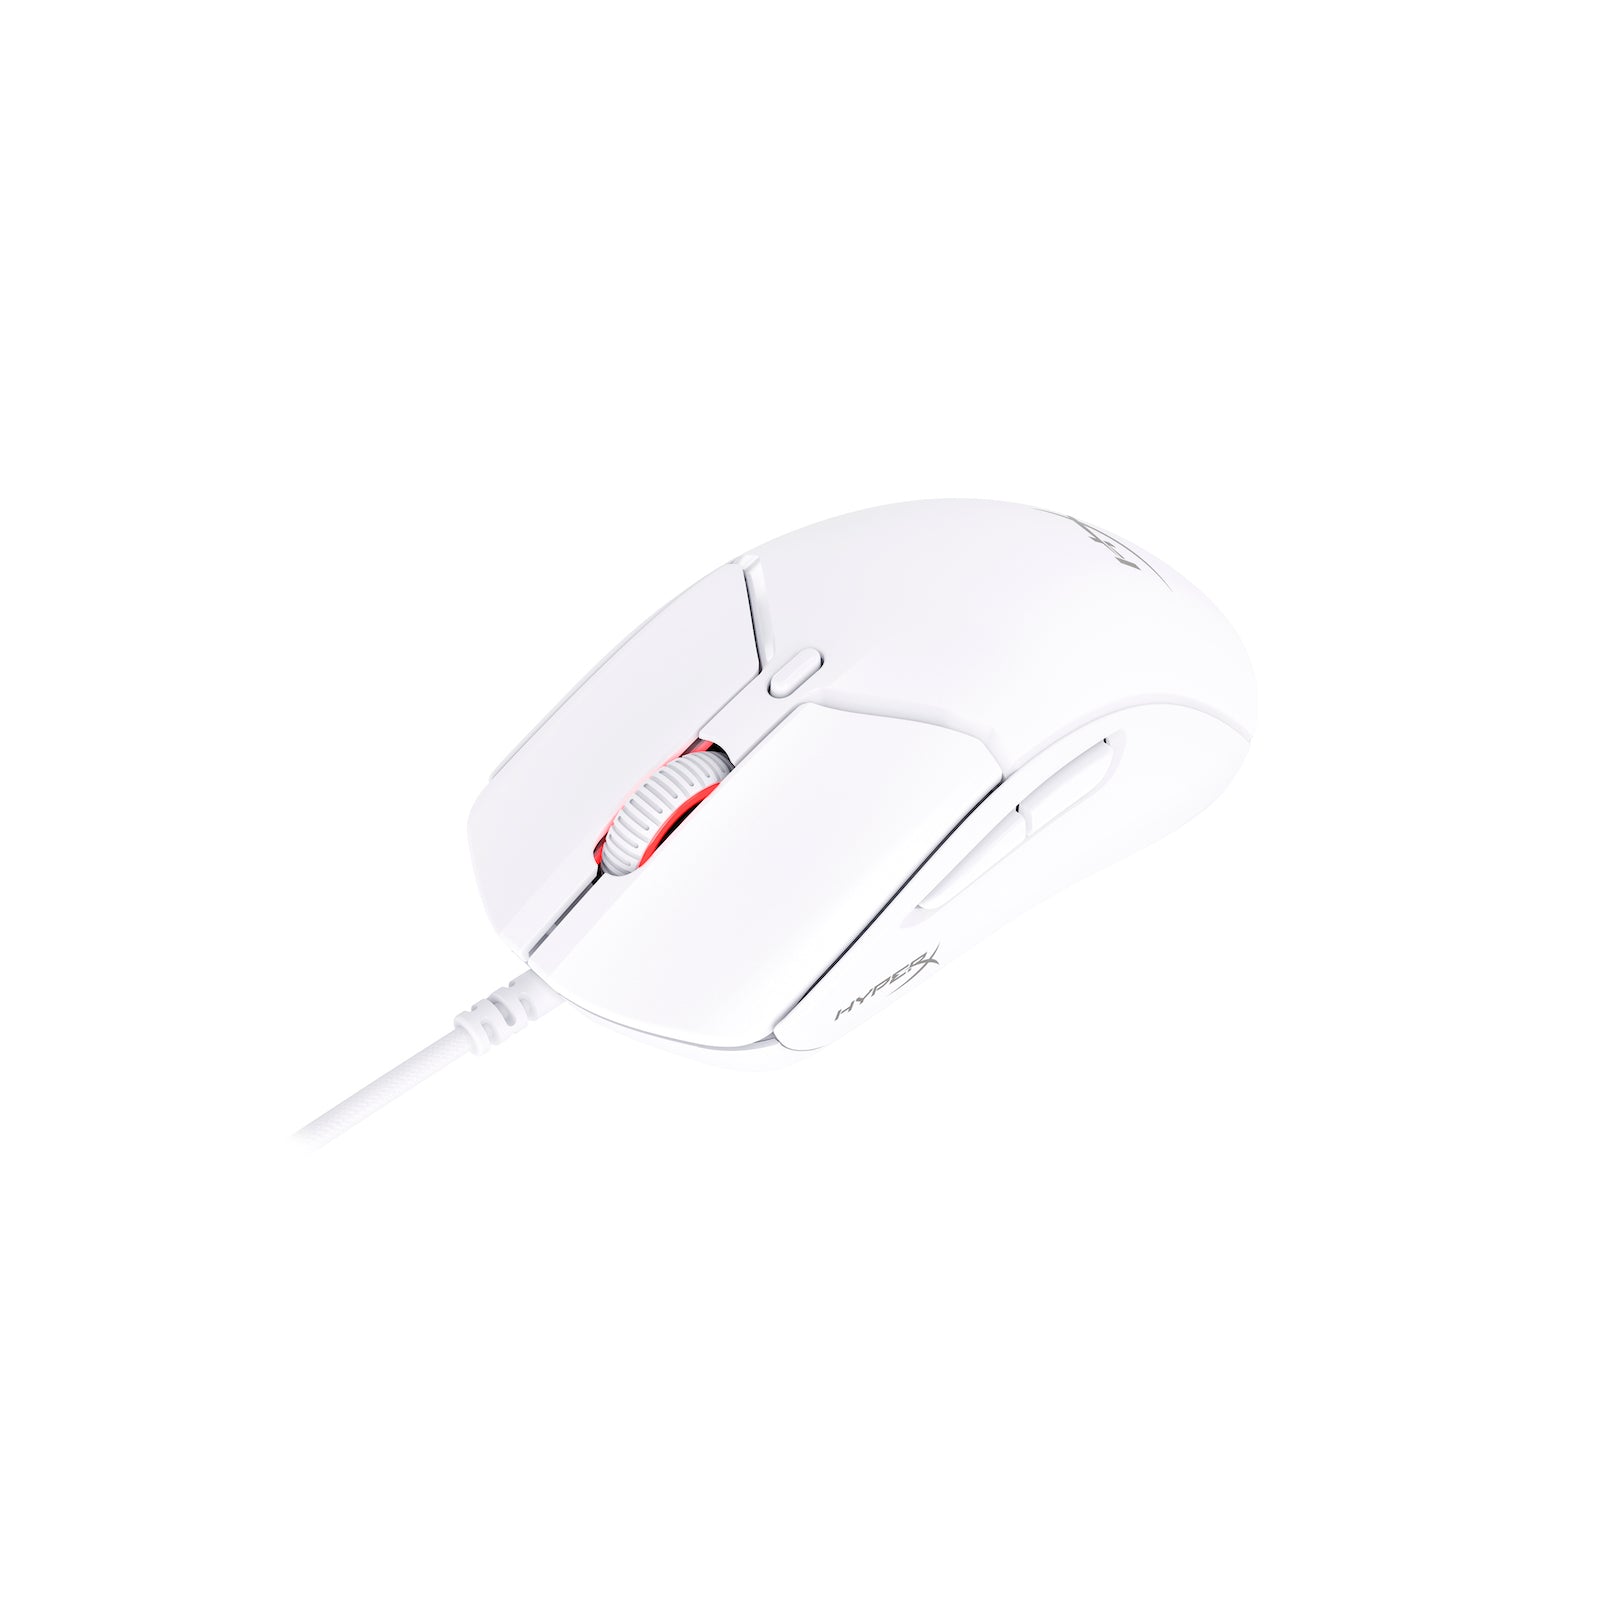 HyperX Pulsefire Gaming Mouse Haste | 2